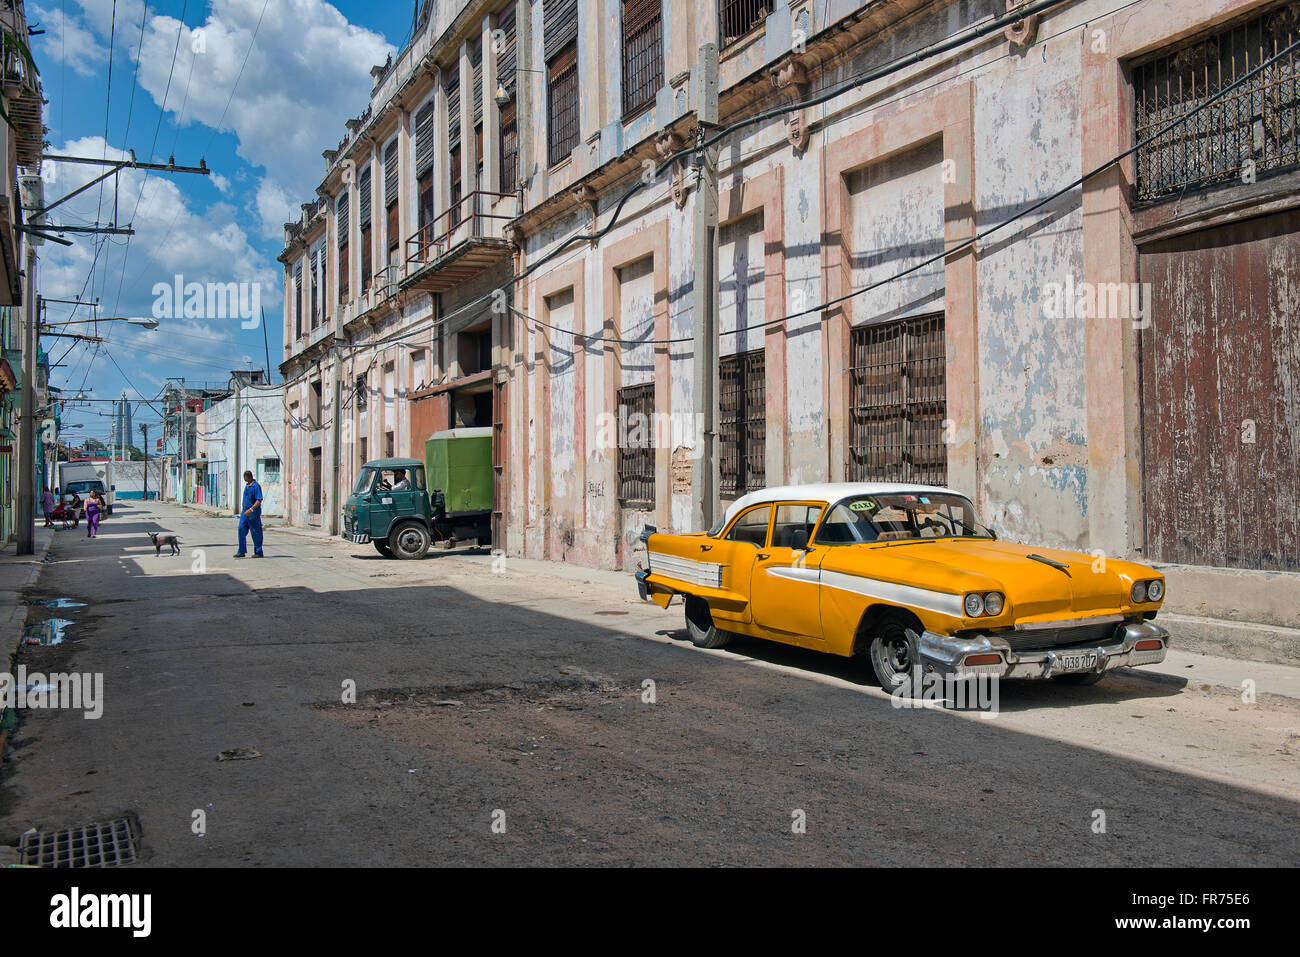 A vintage yellow car parked on the streets of Havana, Cuba. Many of these old cars are used as taxis today. Stock Photo